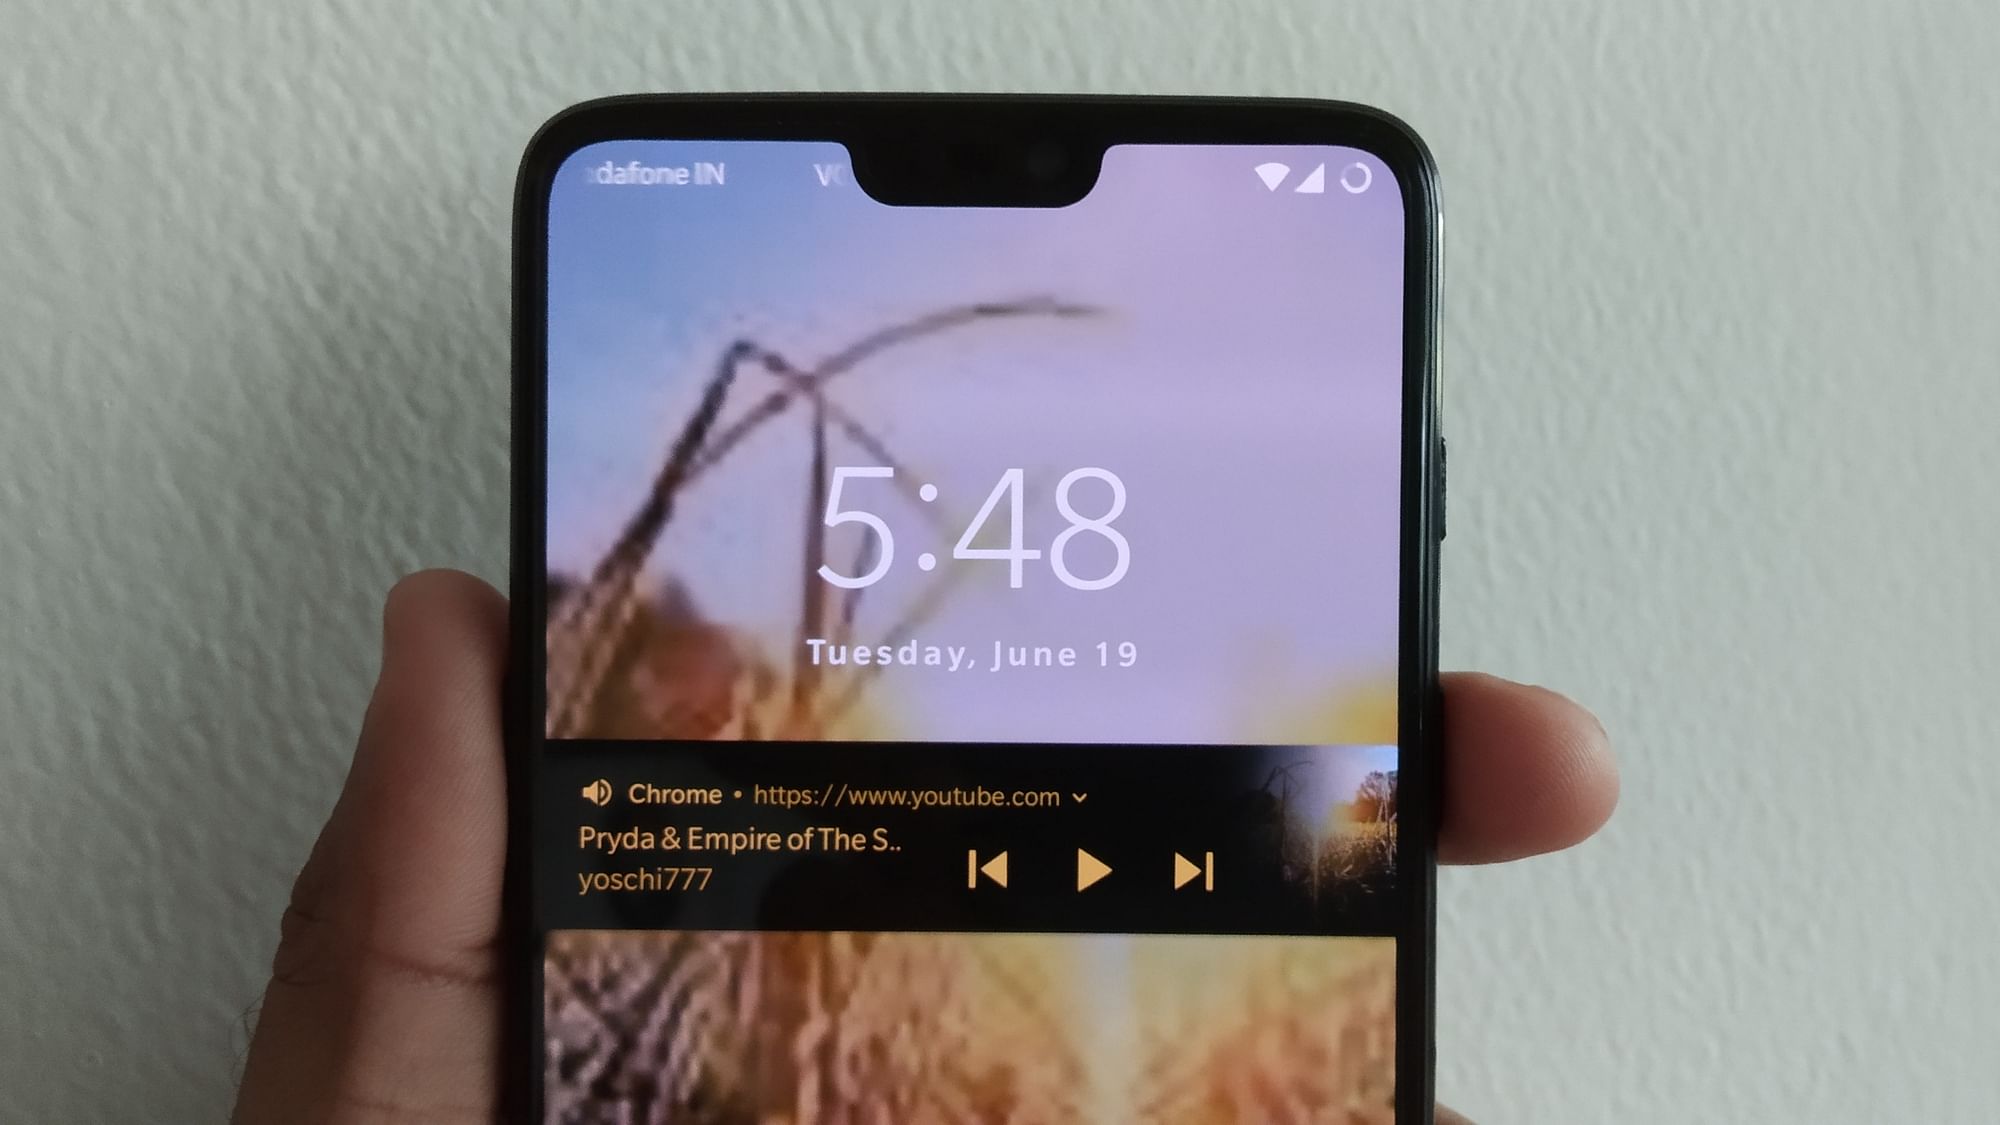 You can play music on YouTube with a locked screen, you just have to figure out your way to it.